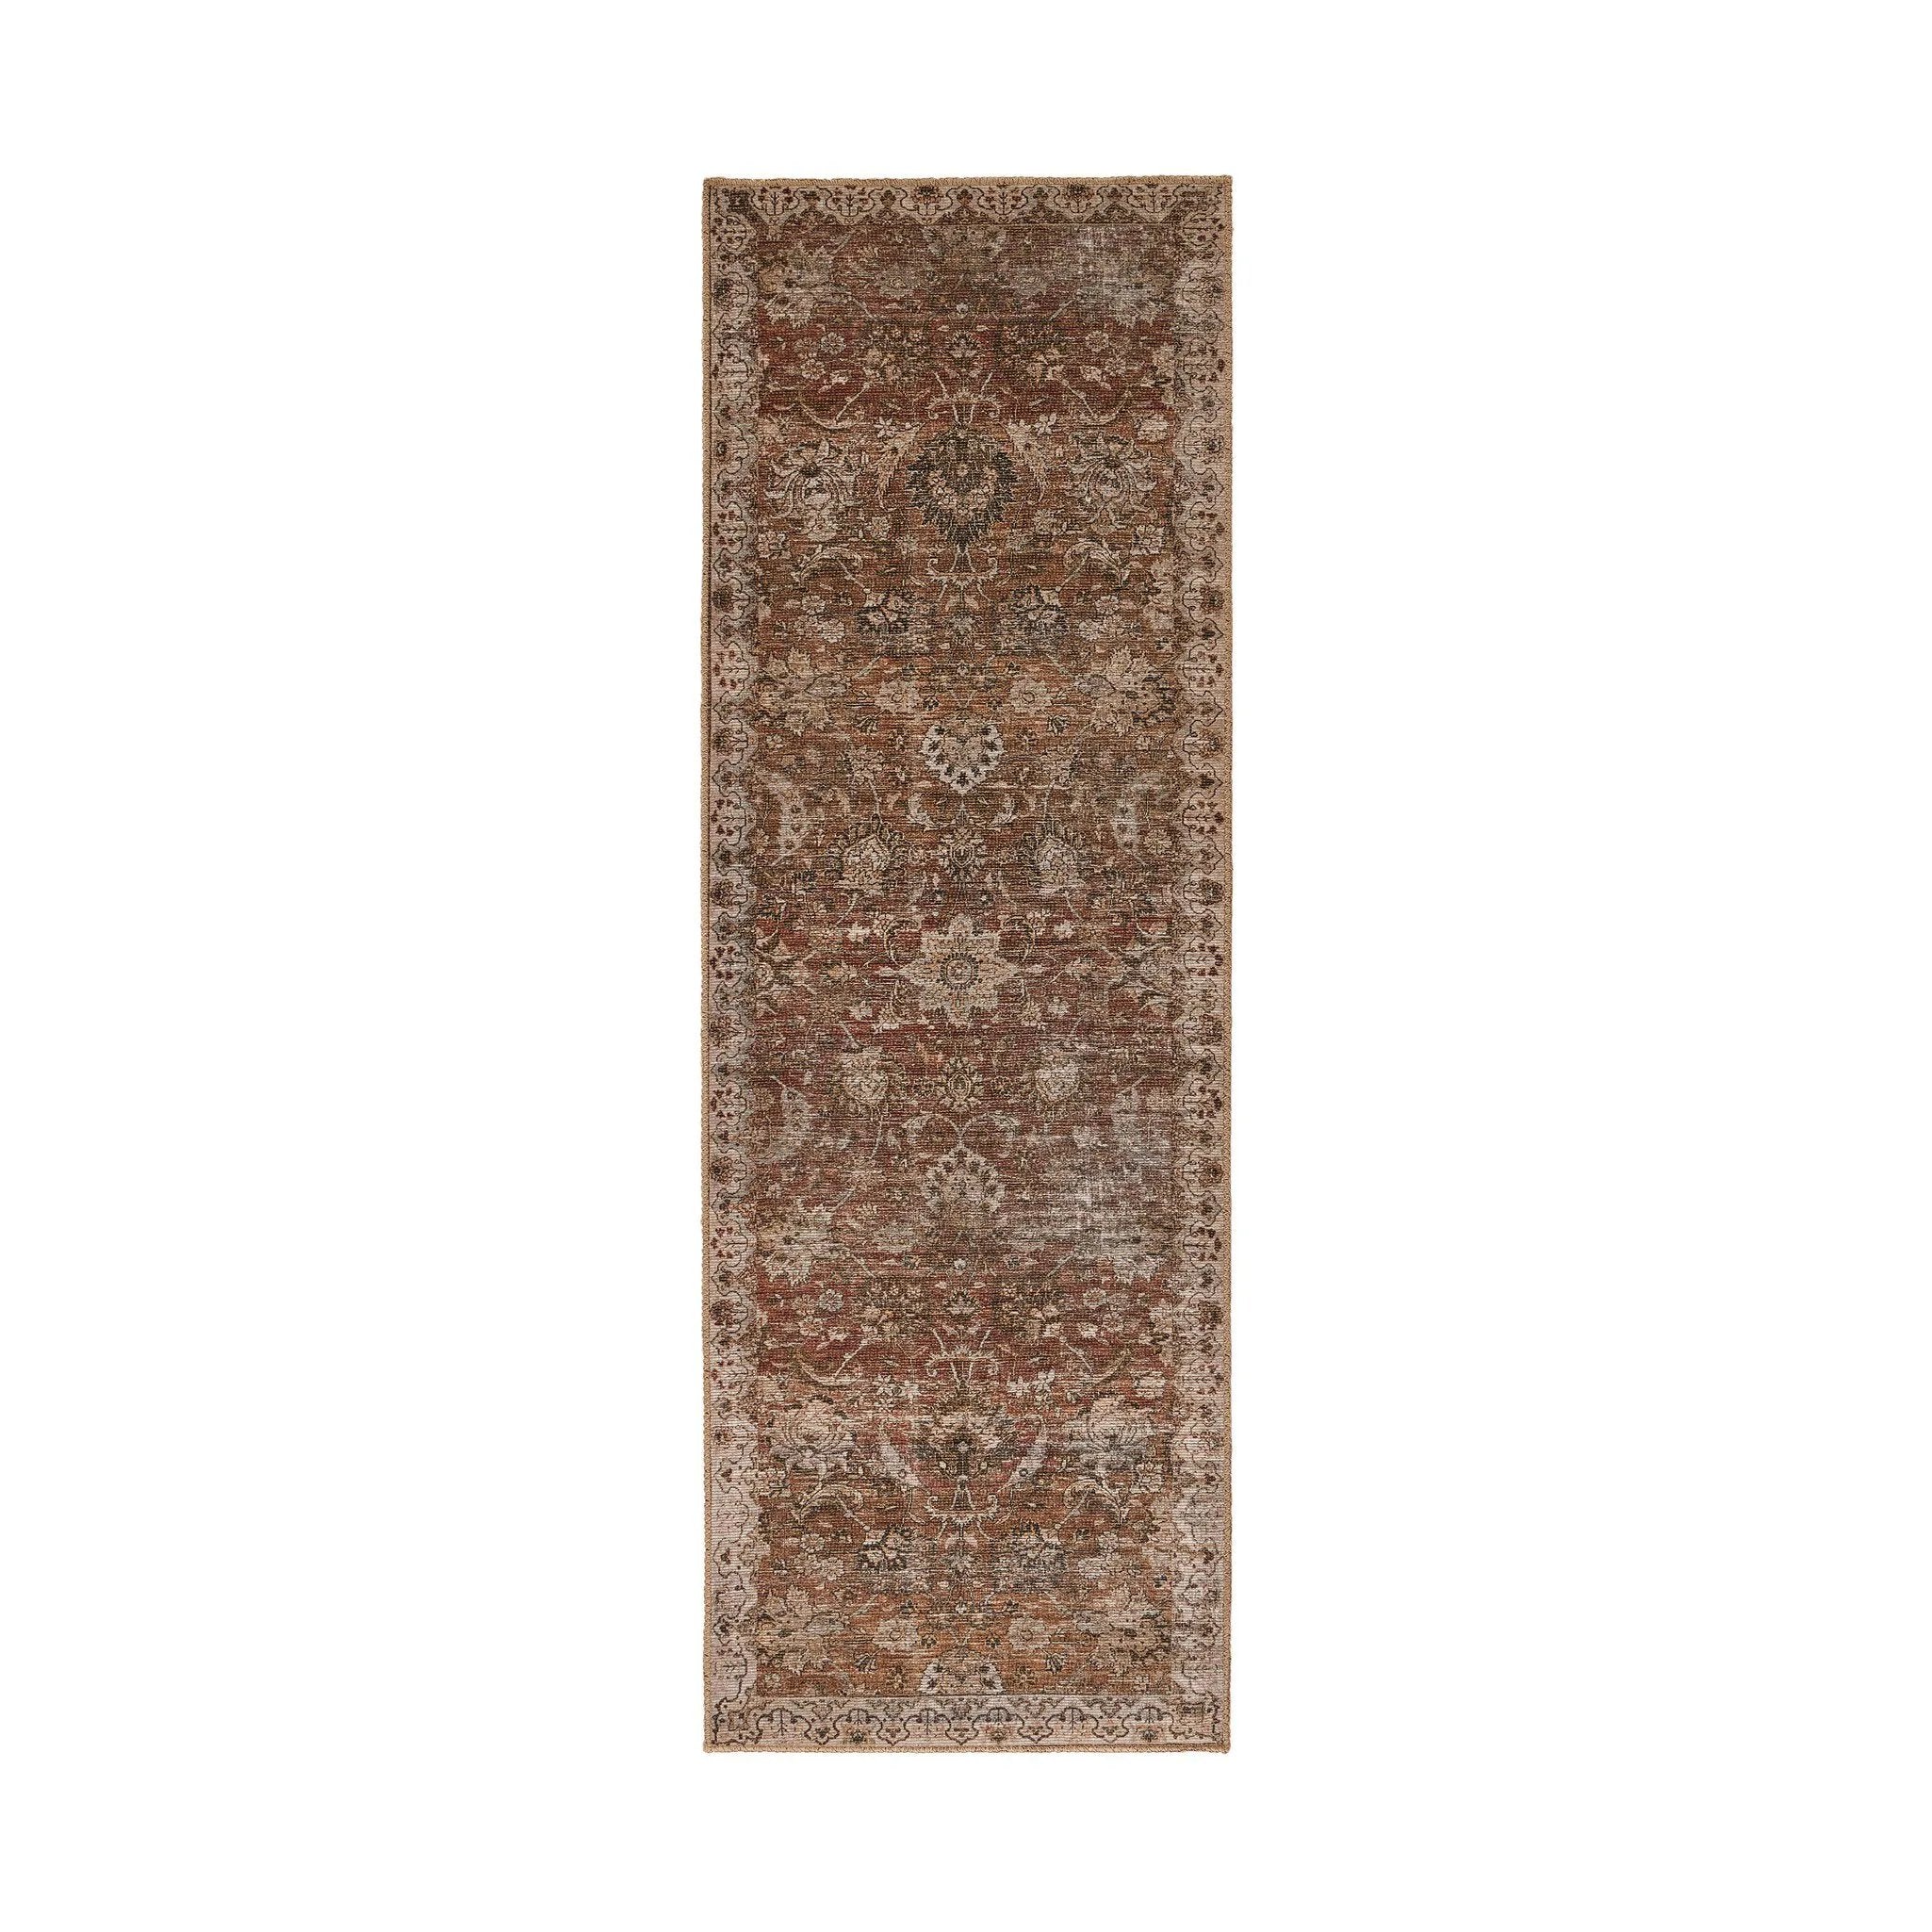 Handmade in Egypt, a textural jute-blend area rug is printed to mimic an authentic vintage rug design.Overall Dimensions30.00"w x 0.50"d x 114.00"hFull Details &amp; SpecificationsTear SheetCleaning Code : X (vacuum Or Light Brush, No Cleaning Products Amethyst Home provides interior design, new home construction design consulting, vintage area rugs, and lighting in the Portland metro area.